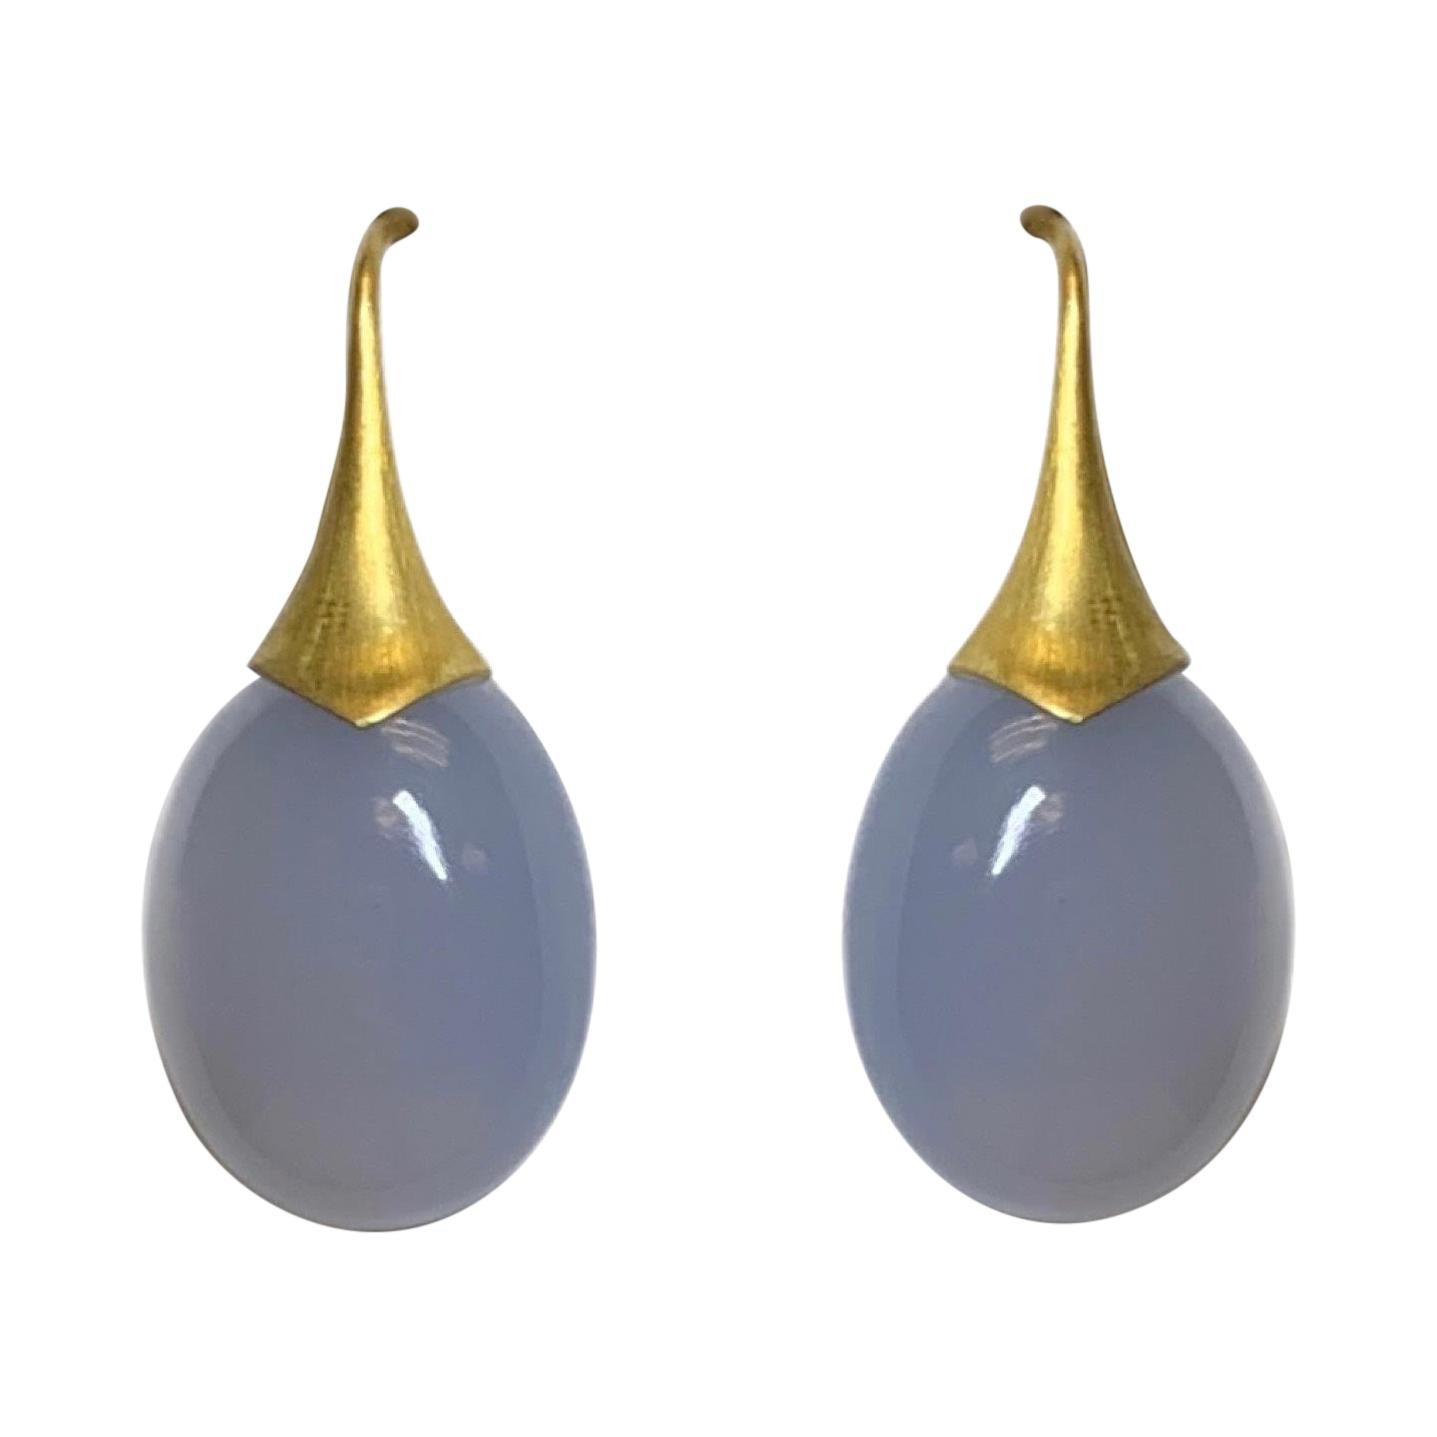 Chalcedony on Trumpet Earrings in 18 Karat Gold, A2 by Arunashi For Sale